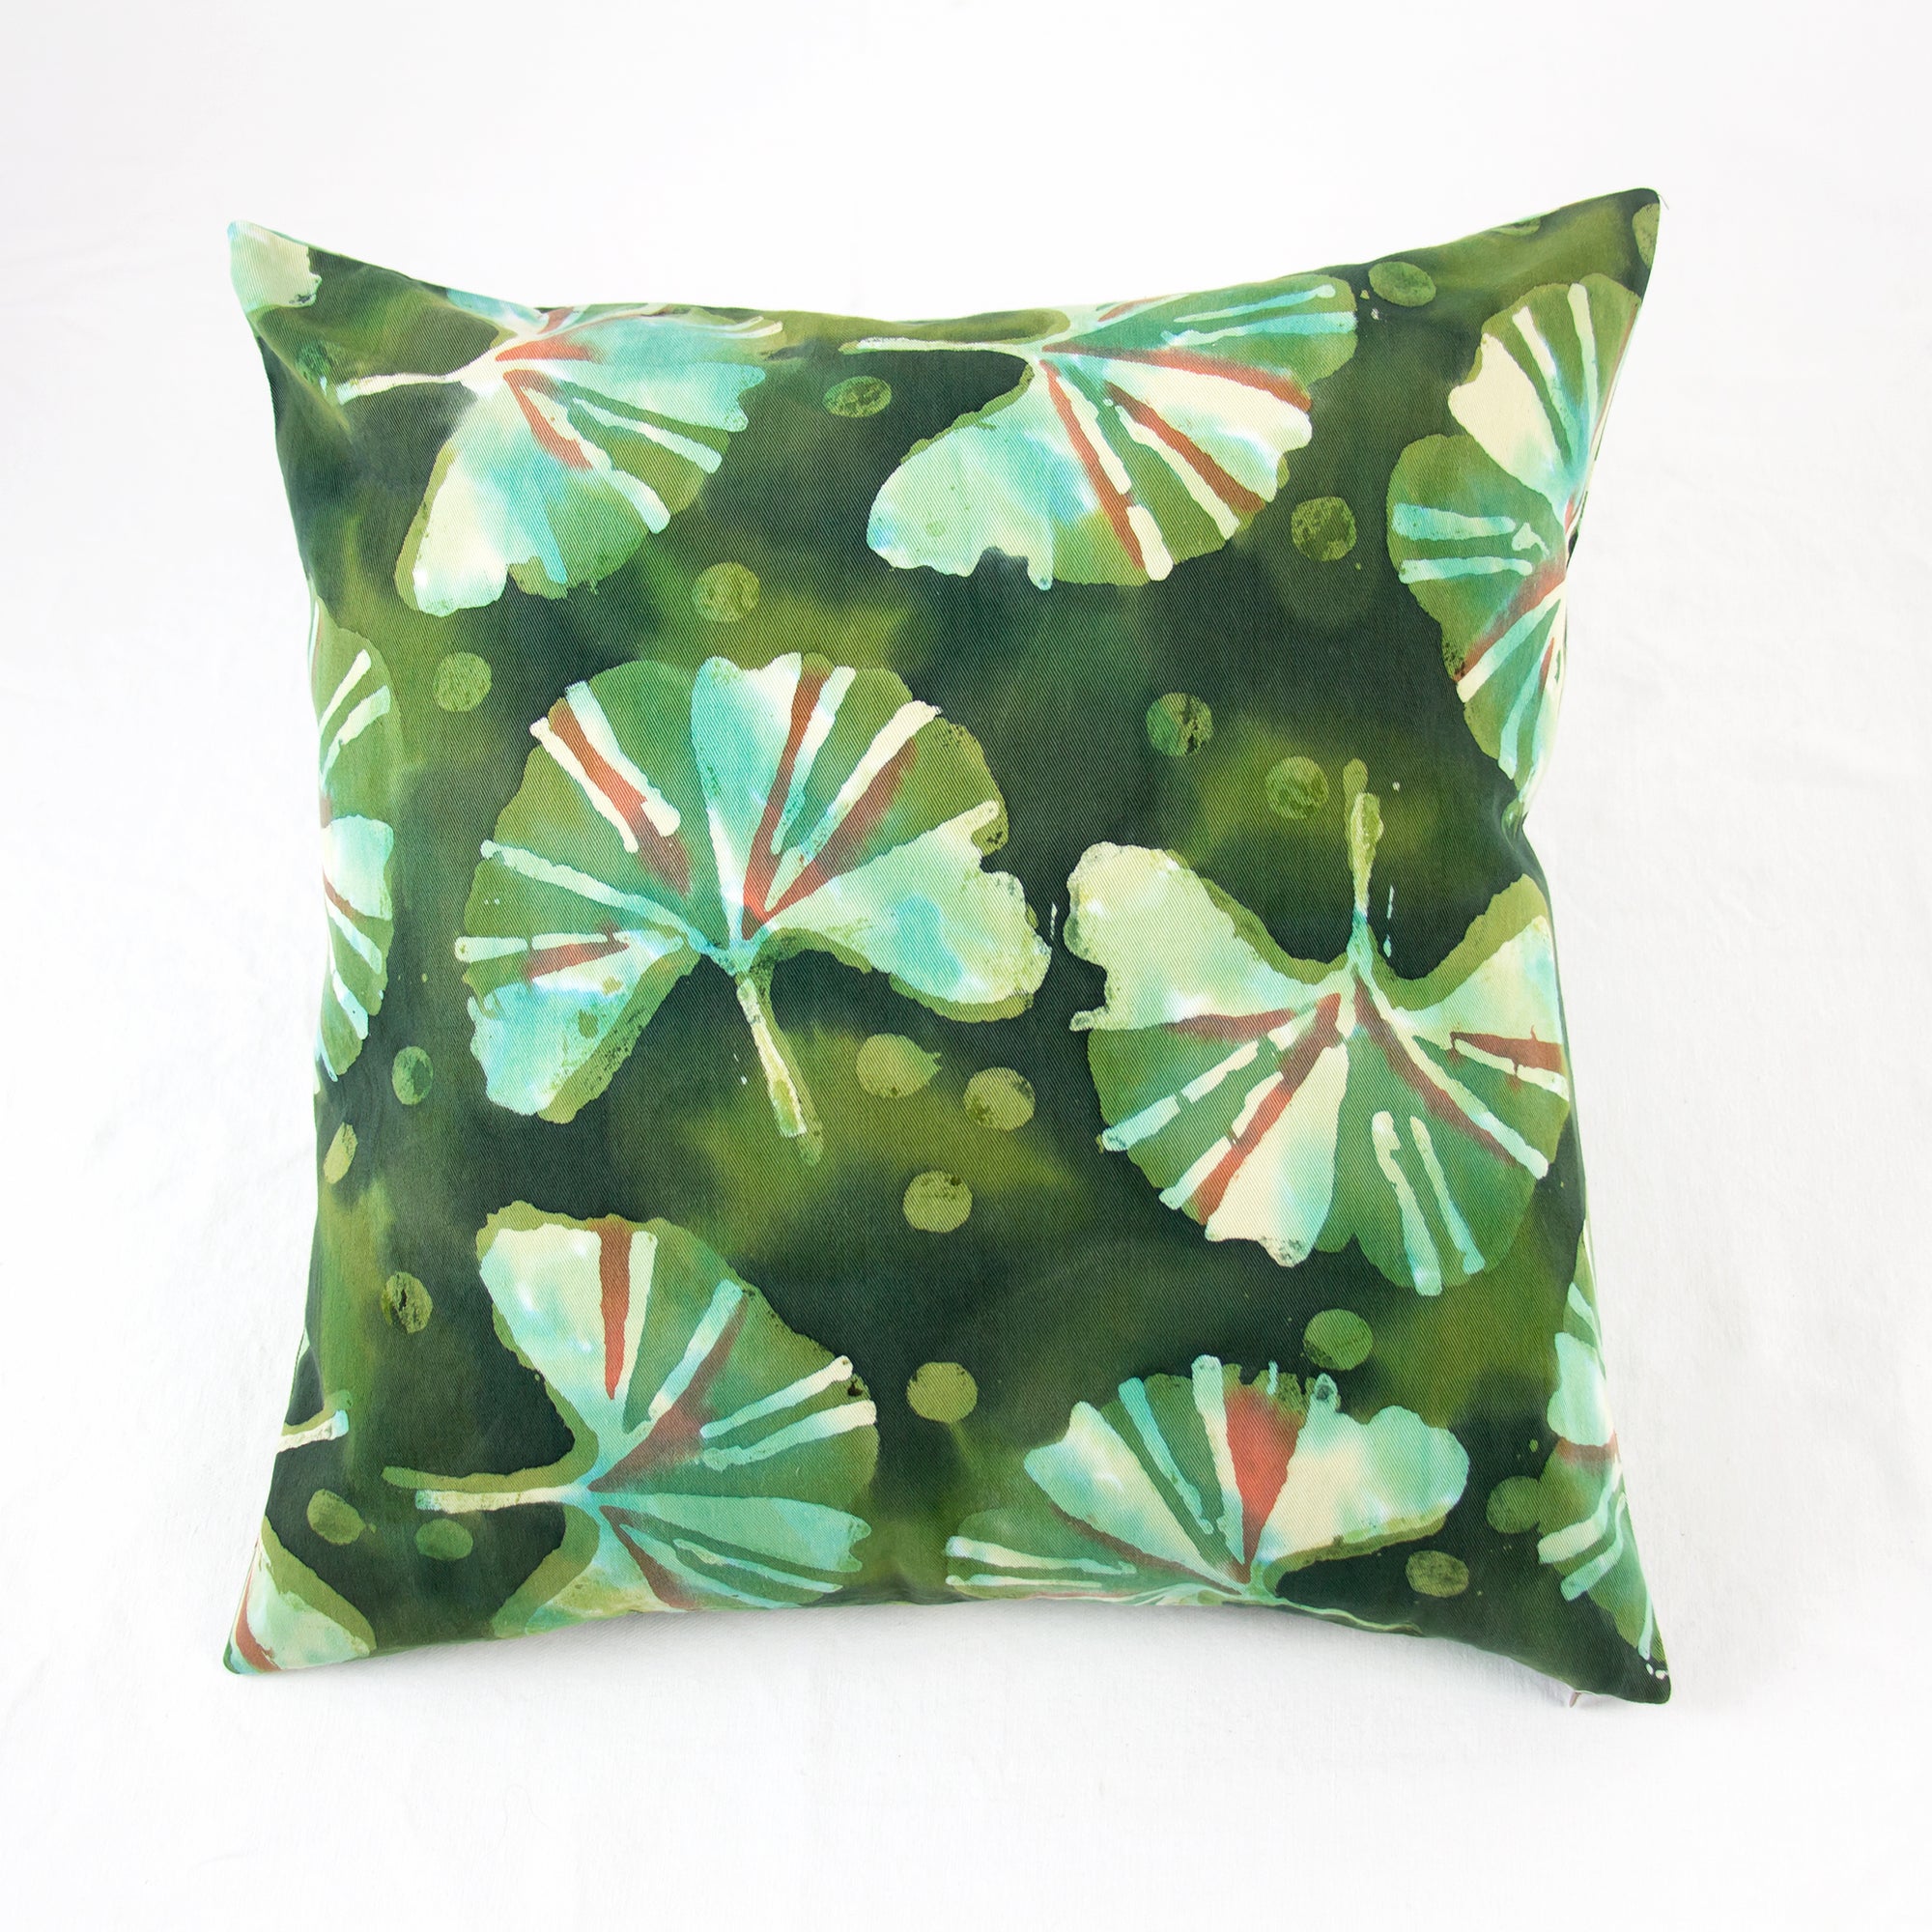 Hand Painted Accent Pillow Cover - Ginkgo Garden